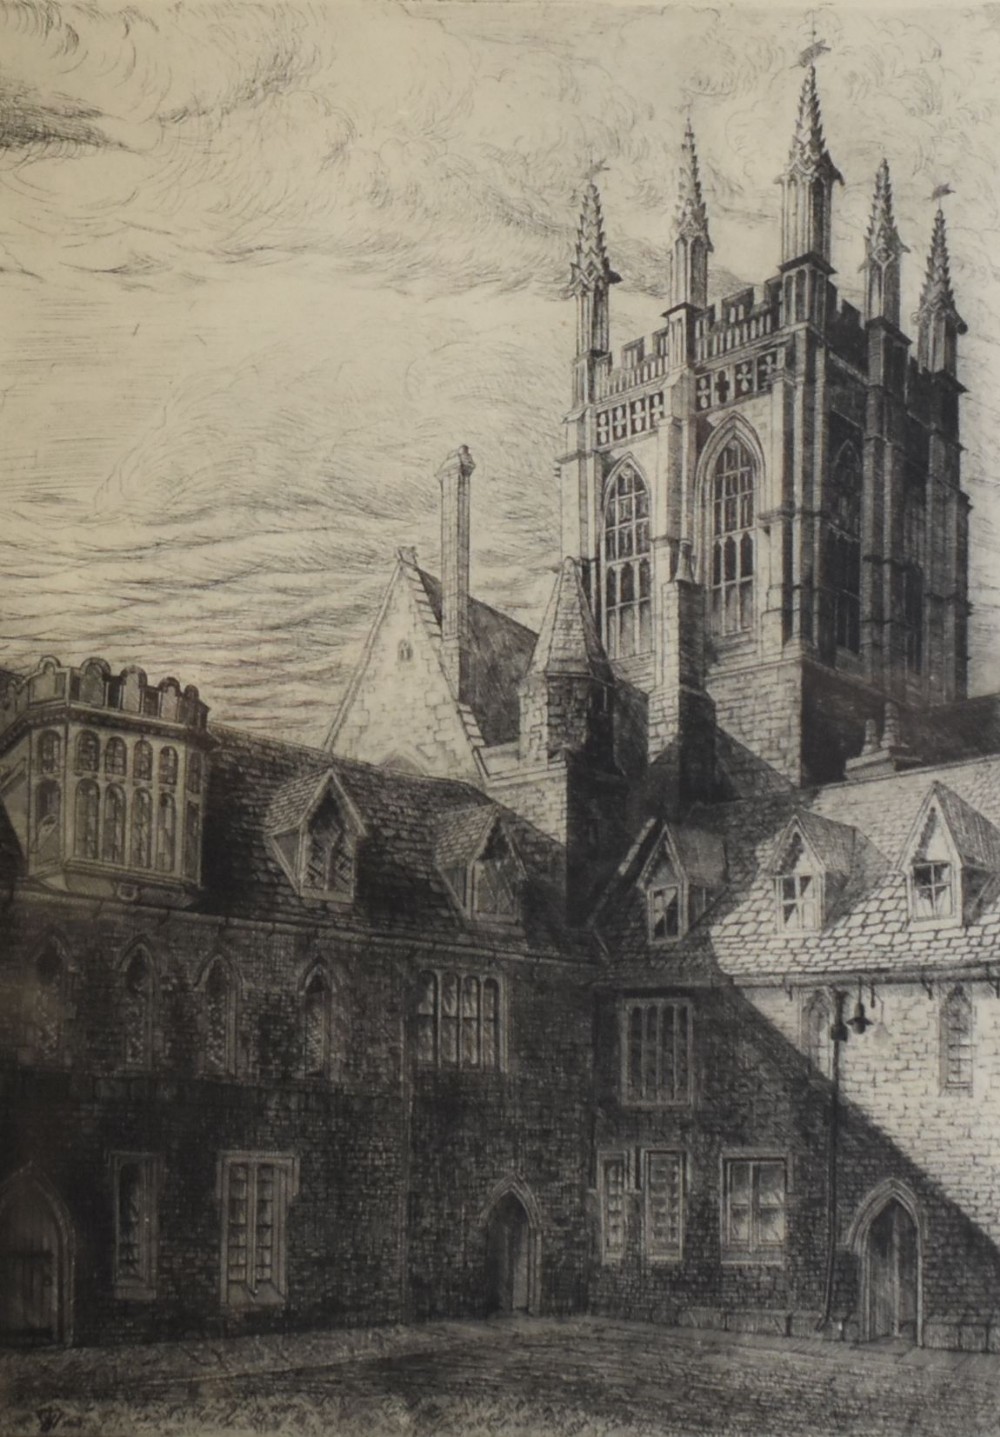 JOHN W VAUGHAN etching - study of a courtyard and cathedral, signed and dated '48, 35 x 25cms